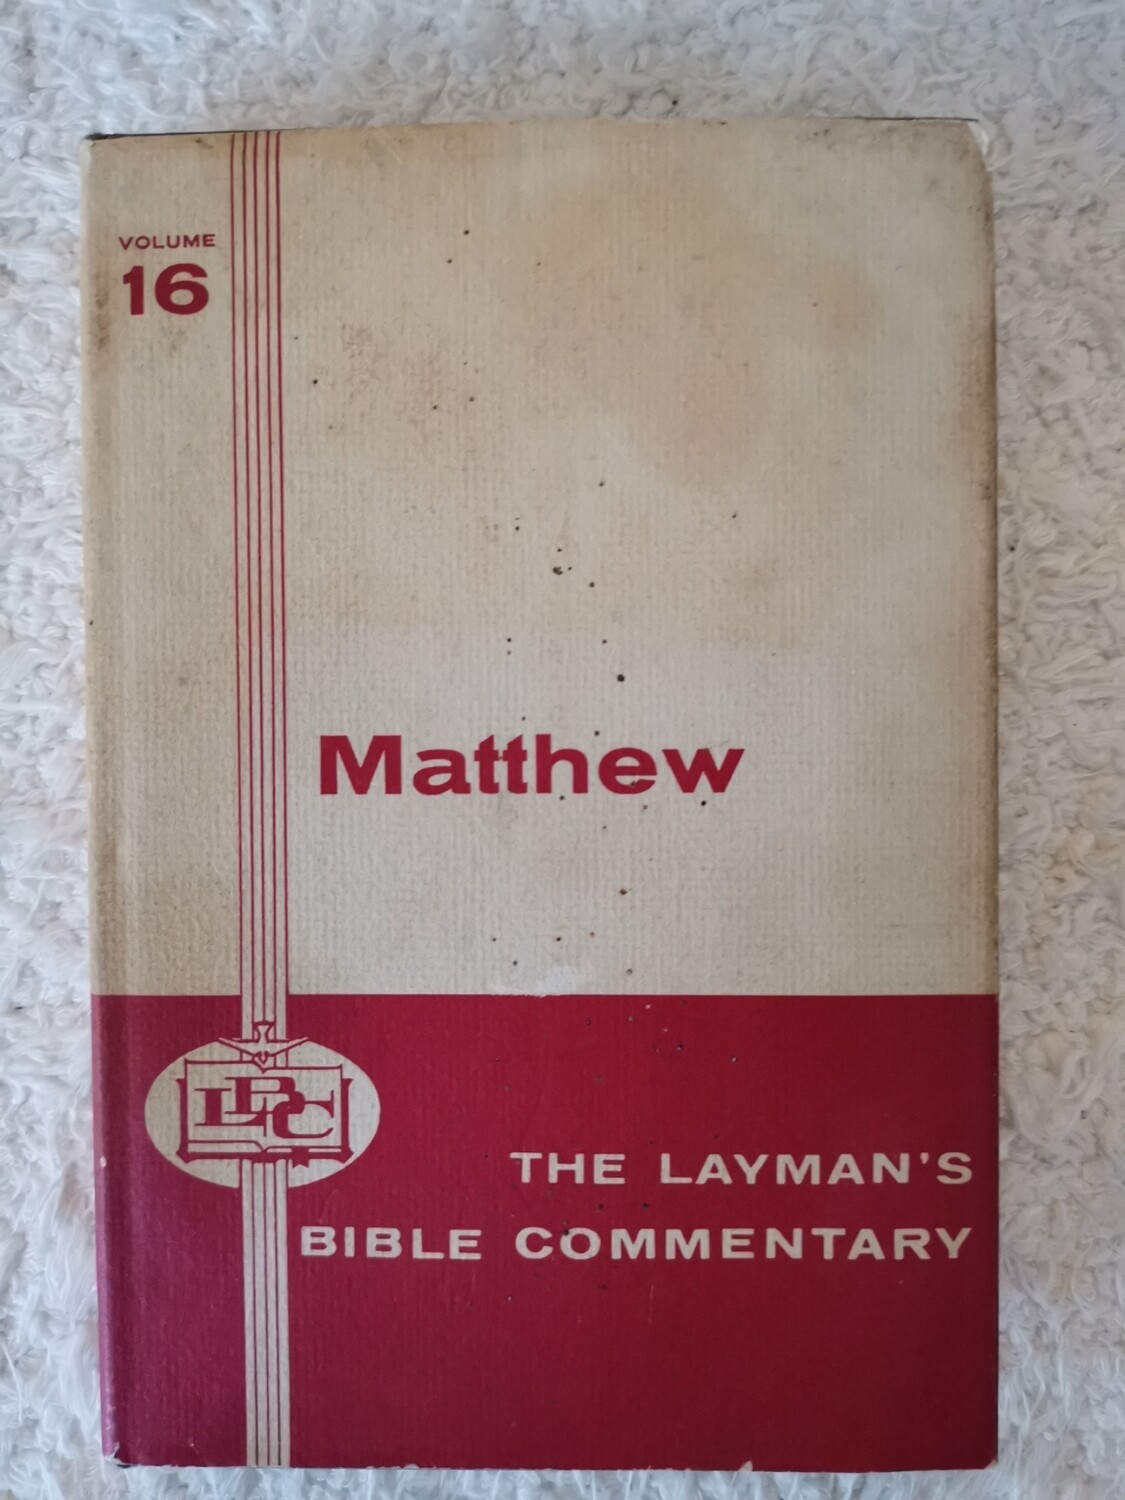 Matthew The layman's Bible commentary